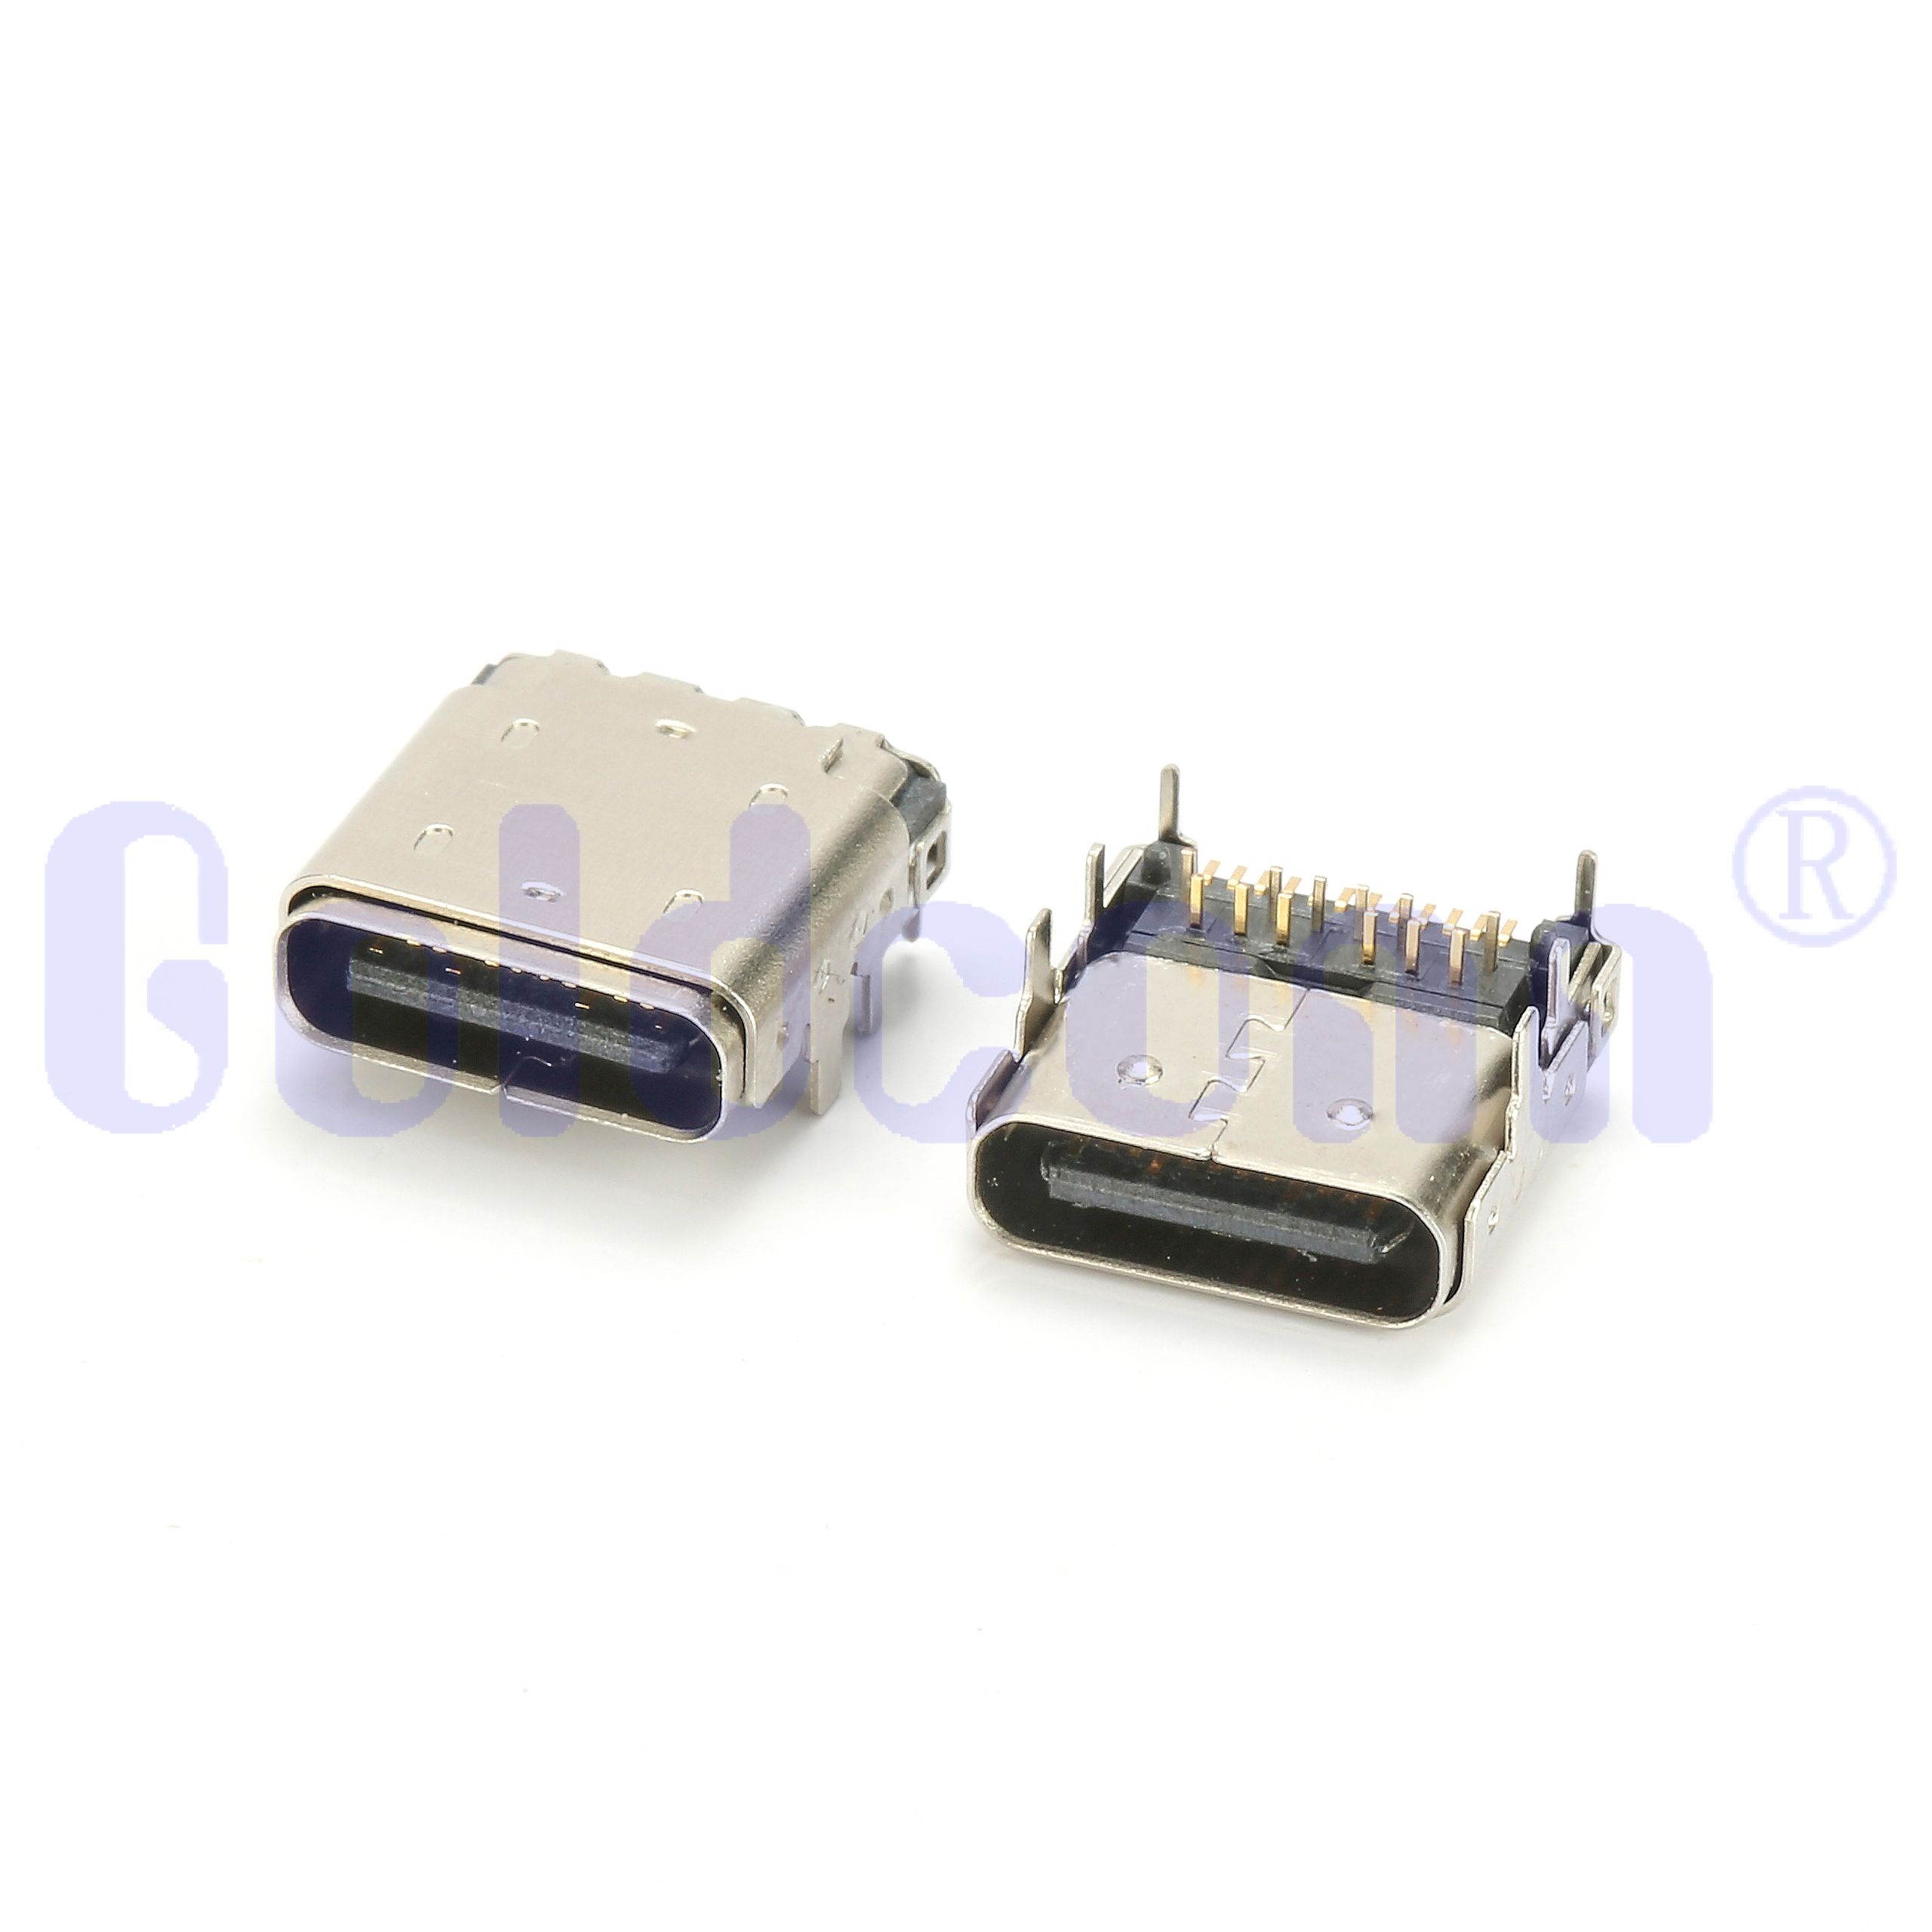 TYPE C Female 24PIN DIP+SMT, With Metal Upper Cover, Solder, Top Mount